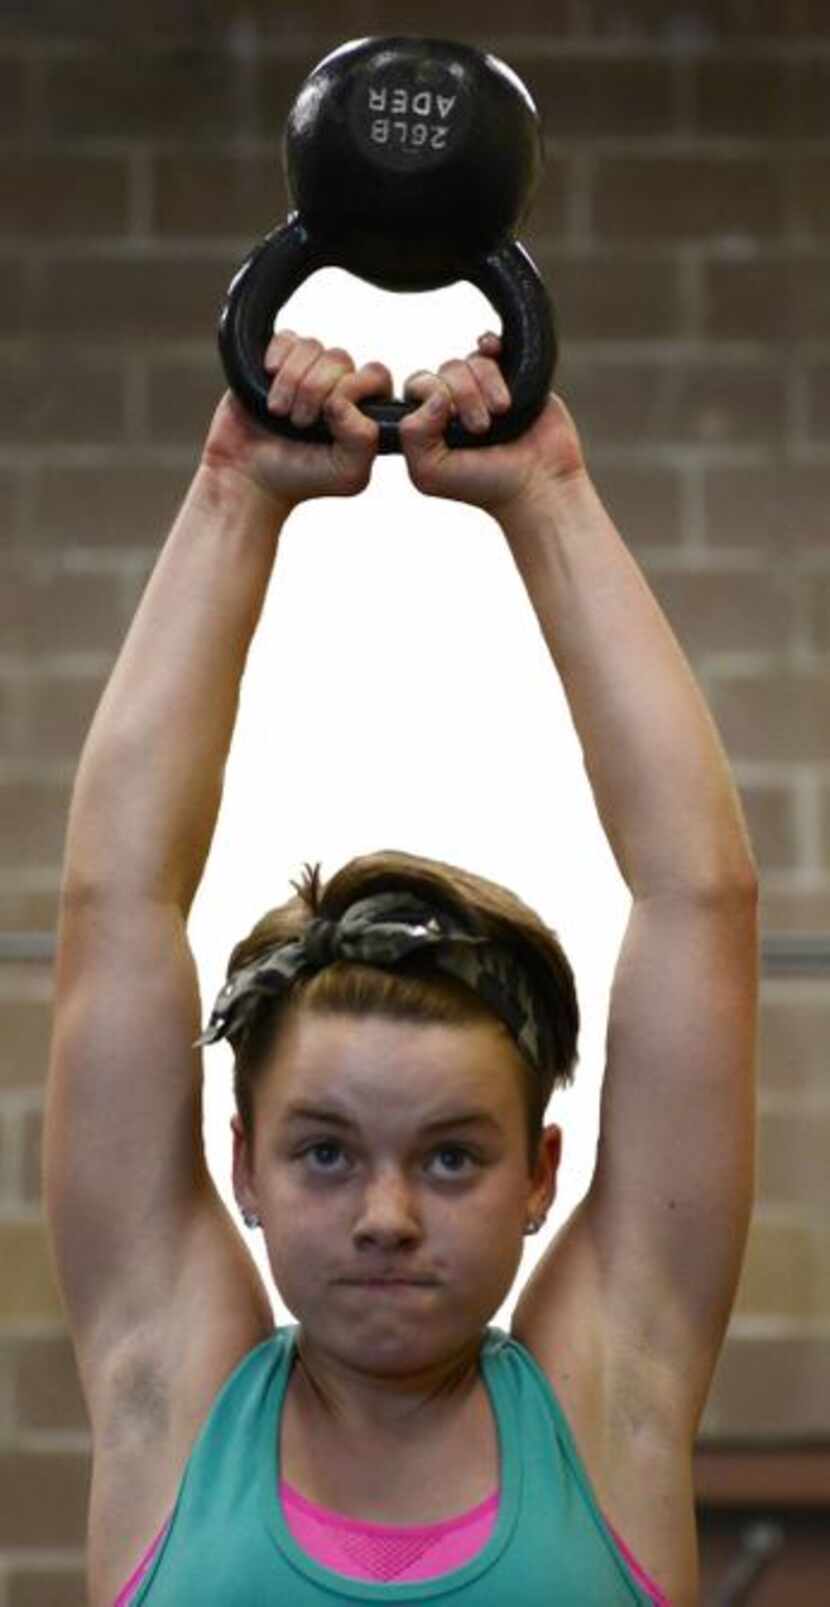 
Brooklin Smith, 13, trains for weightlifting at CrossFit Rockwall. Brooklin is training for...